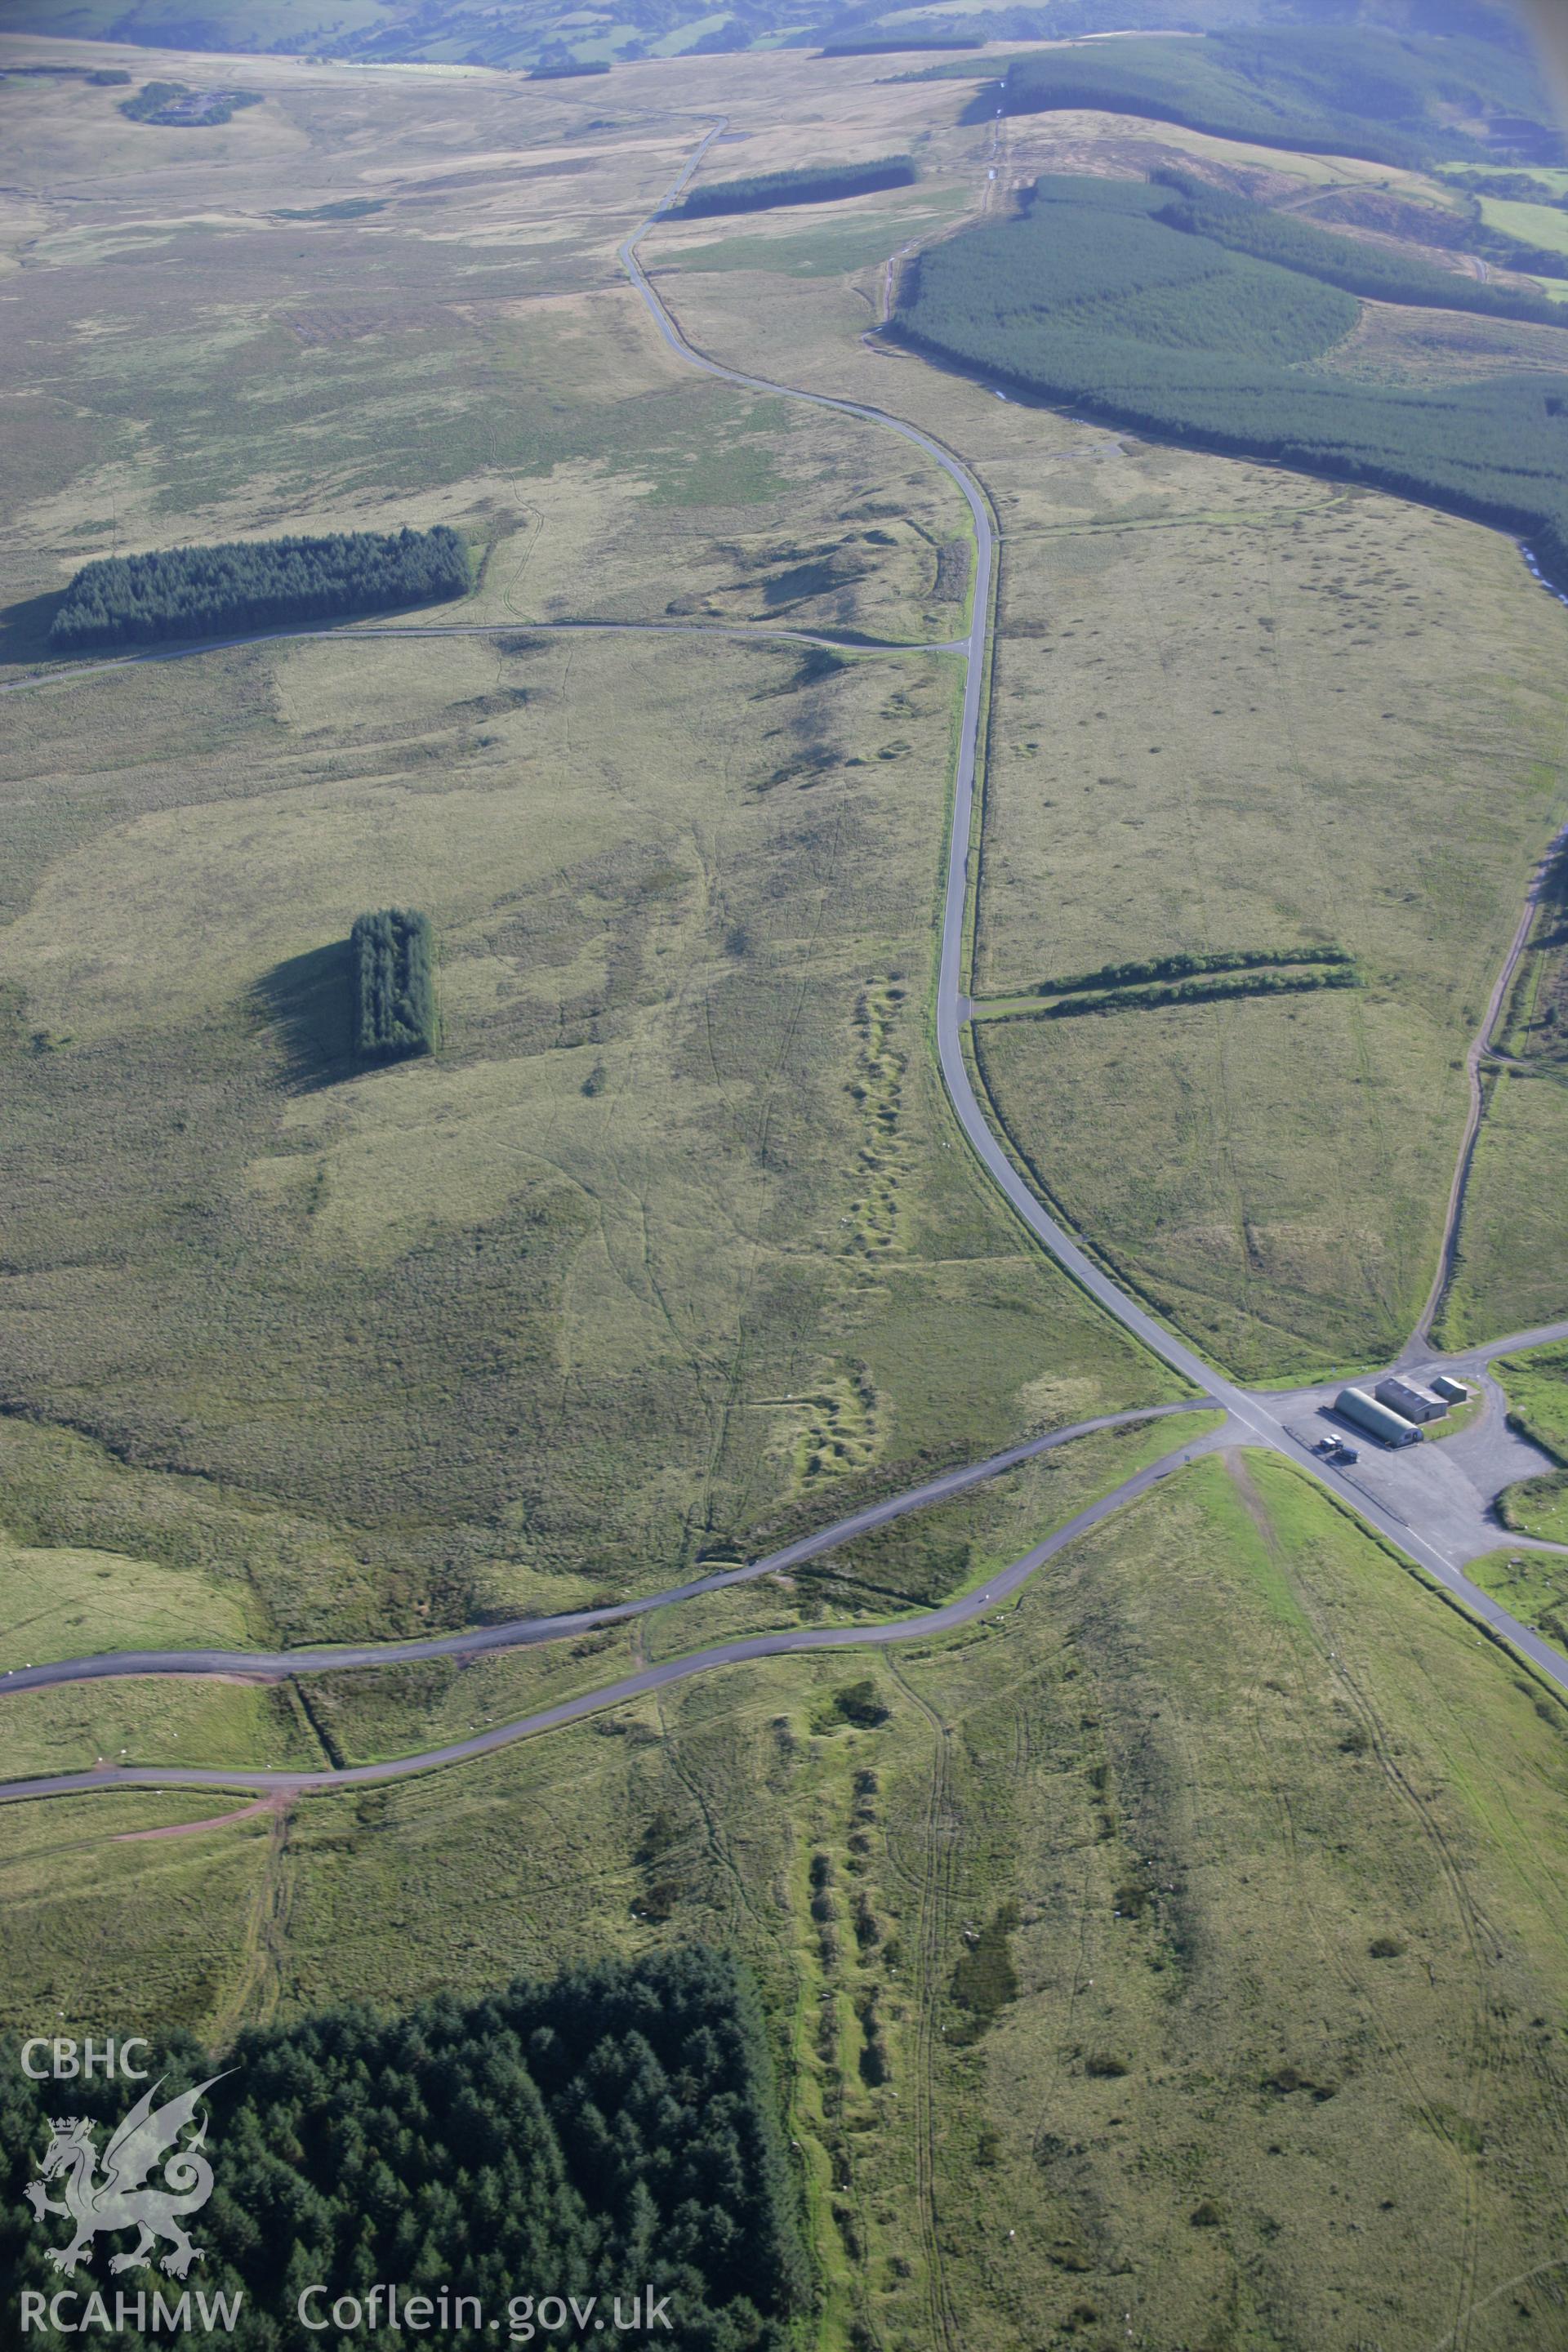 RCAHMW colour oblique aerial photograph of Sennybridge Military Training Area, Mynydd Epynt, showing the Dixie's Corner landscape. Taken on 08 August 2007 by Toby Driver